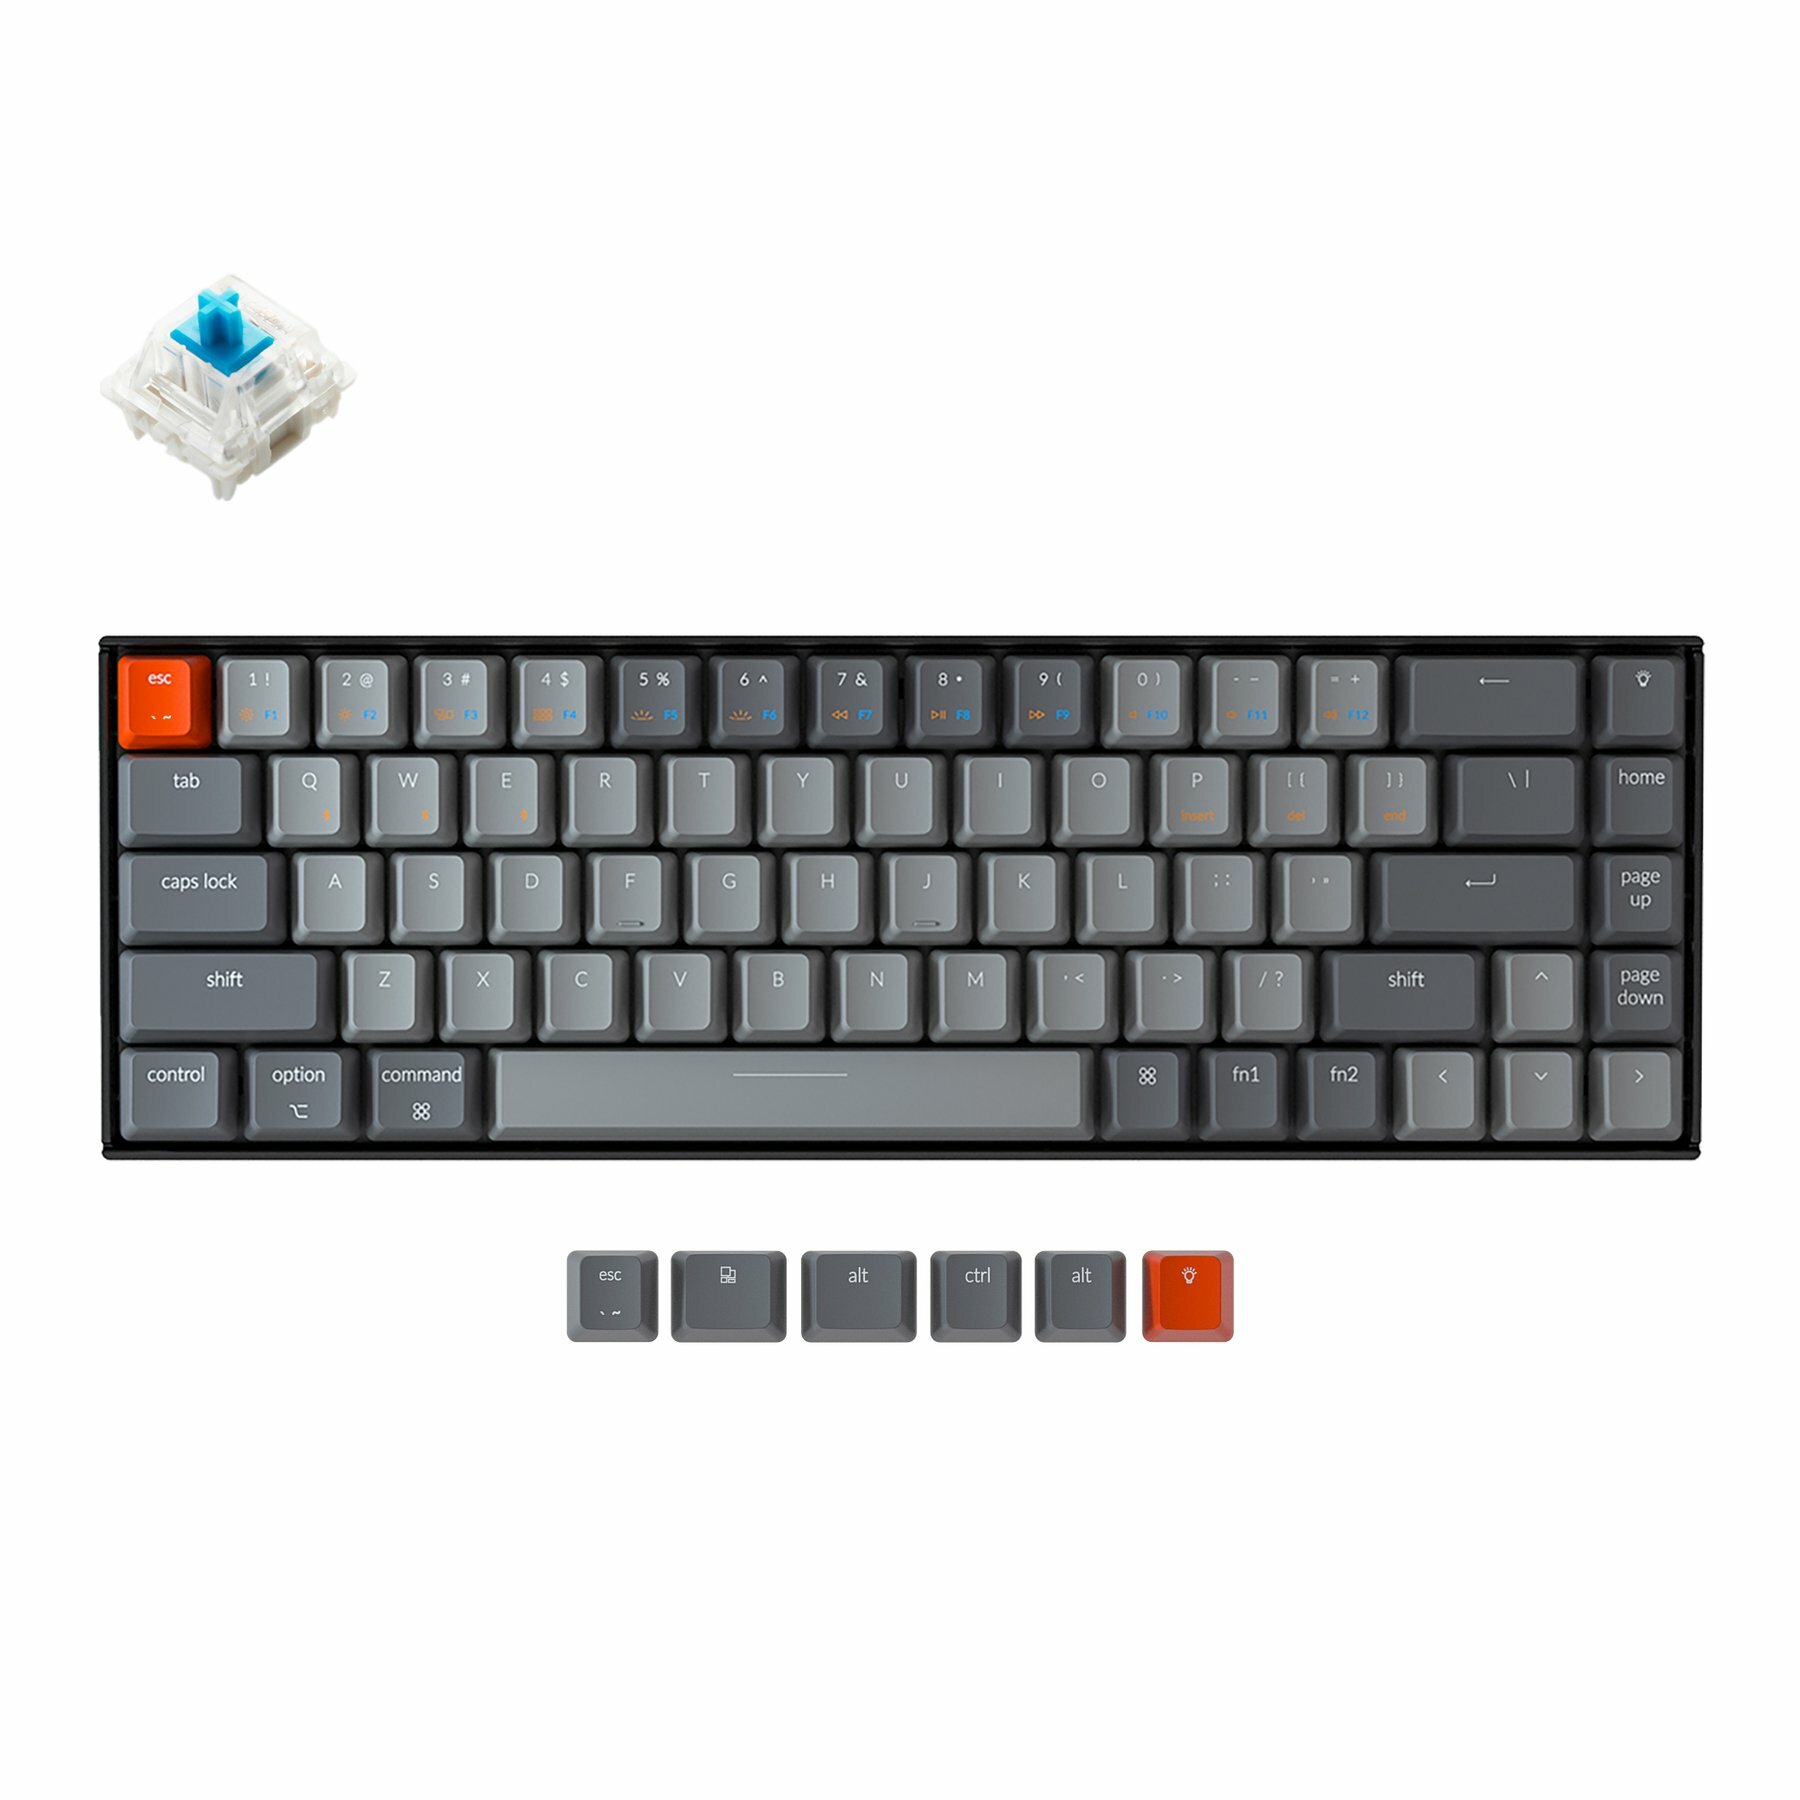 Keychron-K6-hot-swappable-compact-65-percent-wireless-mechanical-keyboard-for-Mac-Windows-iOS-Gateron-switch-blue-with-type-C-RGB-white-backlight_3d876bd9-1dbb-468f-b0de-6d6a2c98e2ba_1800x1800